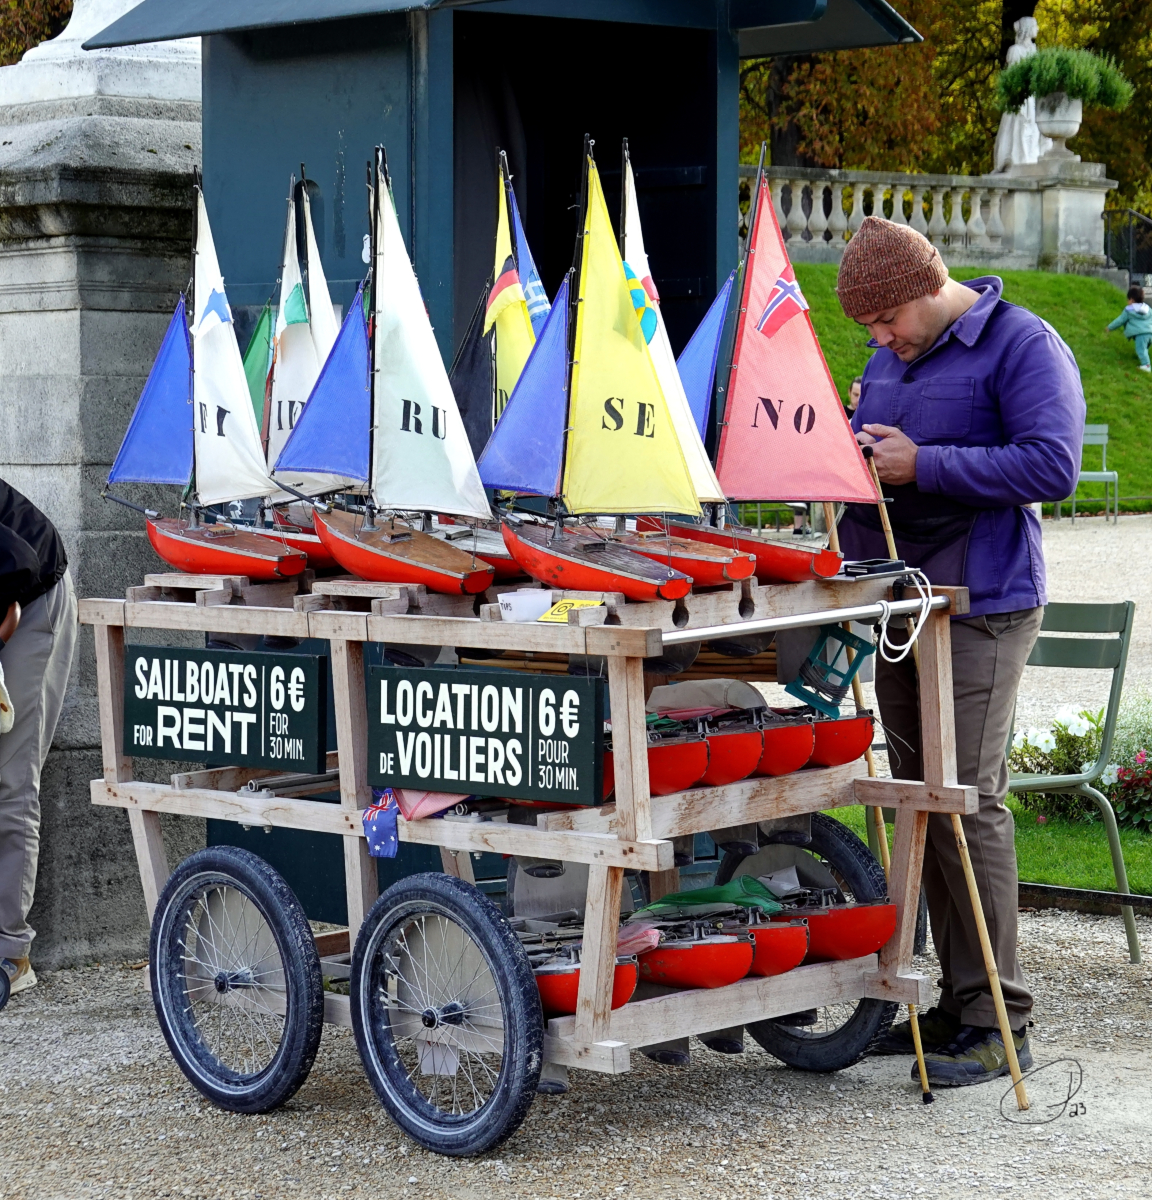 Luxembourg Garden - Sailboats for Rent